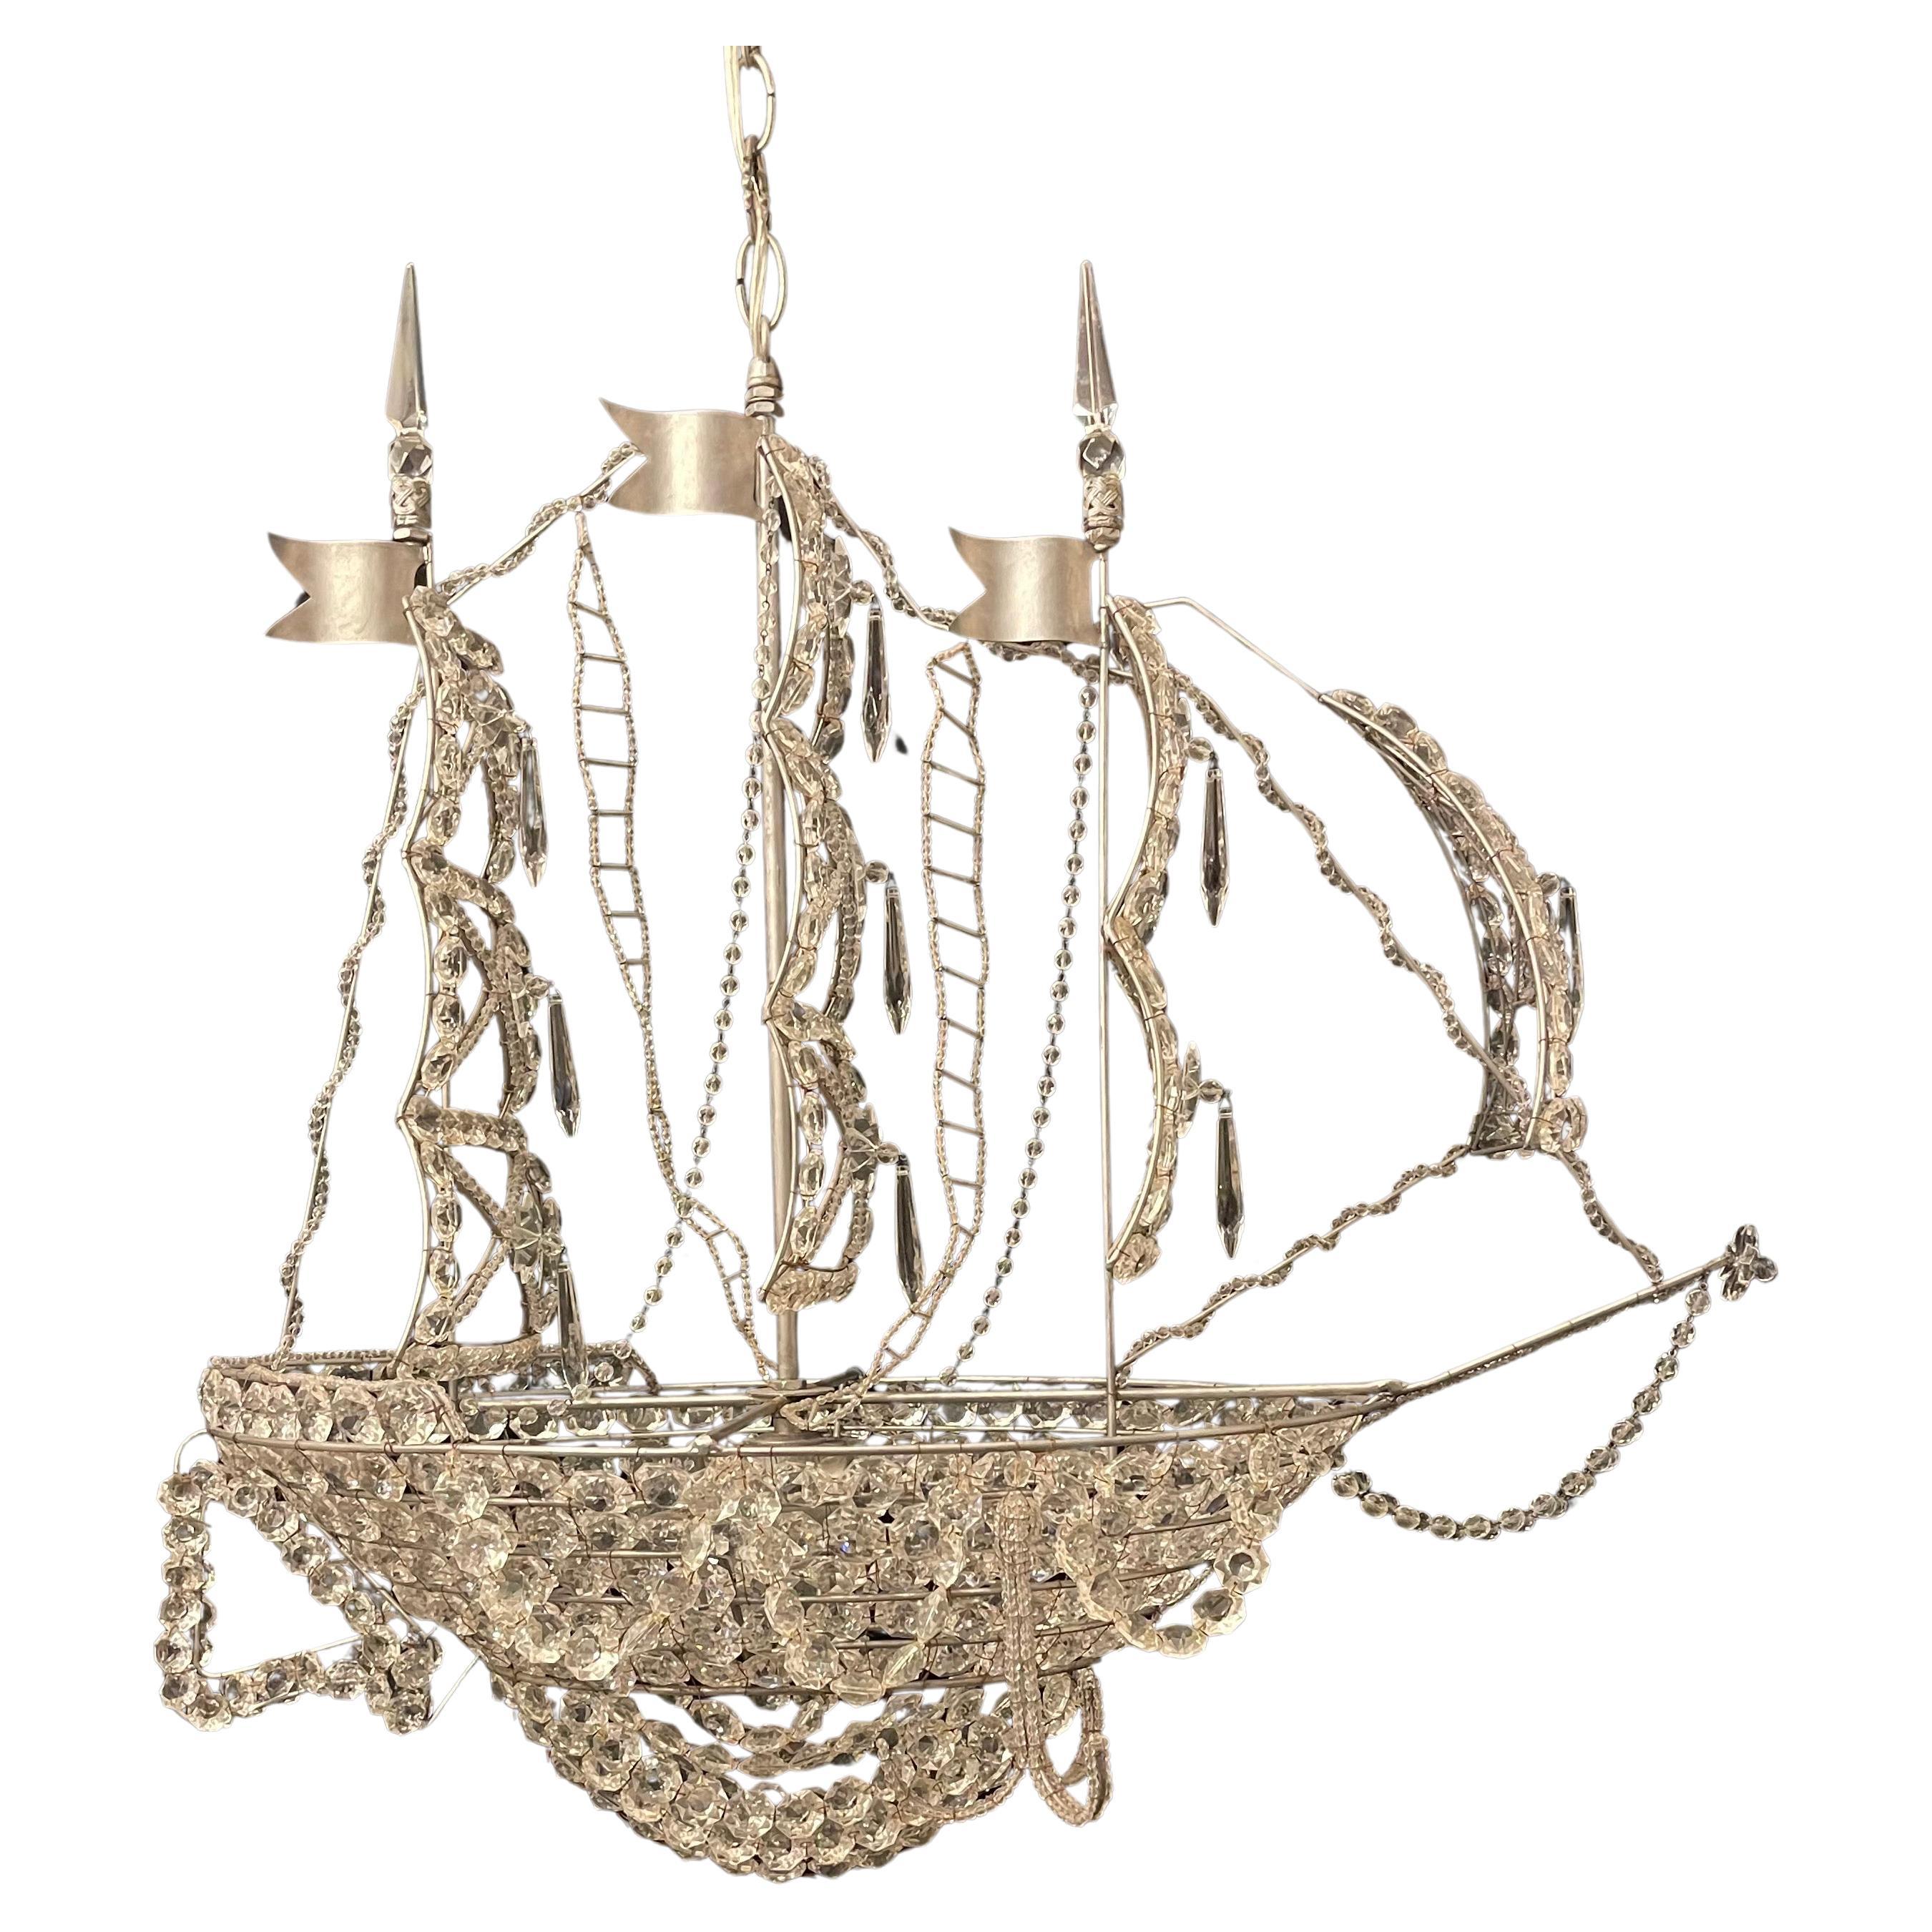 Beautiful Vintage Large Italian Crystal Beaded Gilt Boat Chandelier Ship Fixture For Sale